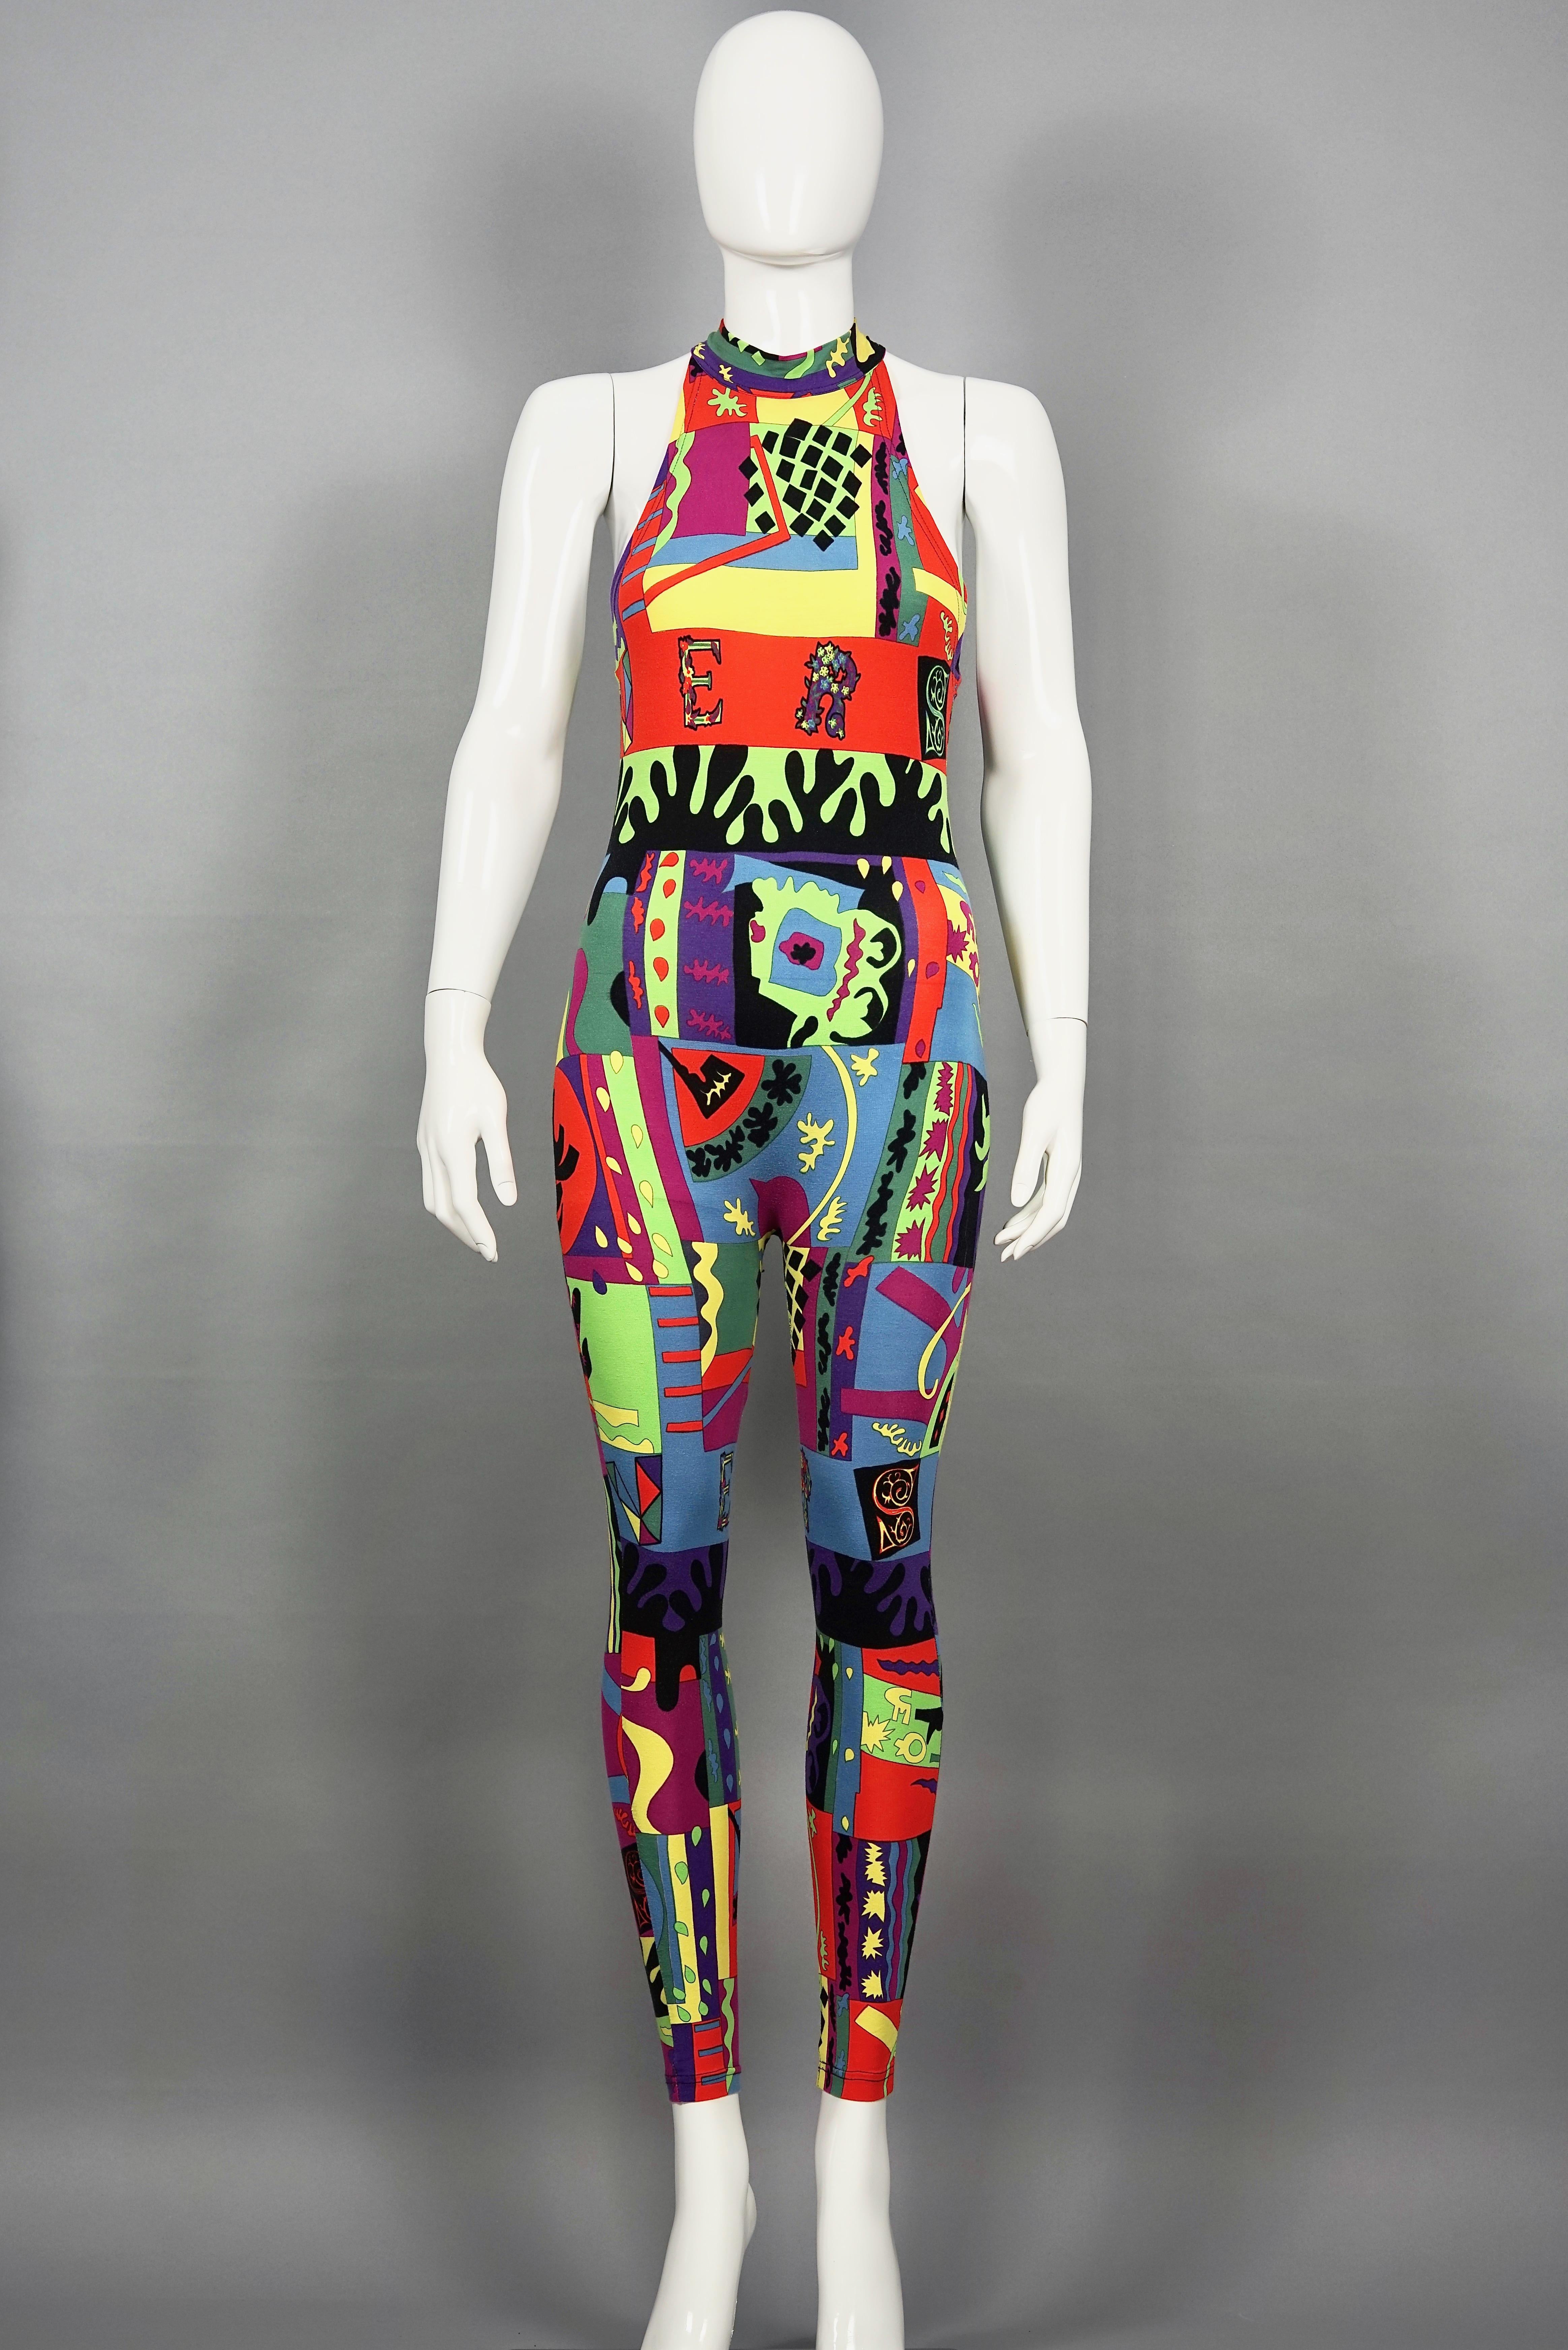 Vintage VERSACE Abstract Pop Art Print Catsuit Jumpsuit

Measurements taken laid flat, please double bust and waist:
Bust: 15.35 inches (39 cm)
Waist: 12.99 inches (33 cm)
Hips: 15.35 inches (39 cm)
Length: 45.27 inches (115 cm)

Features:
- 100%